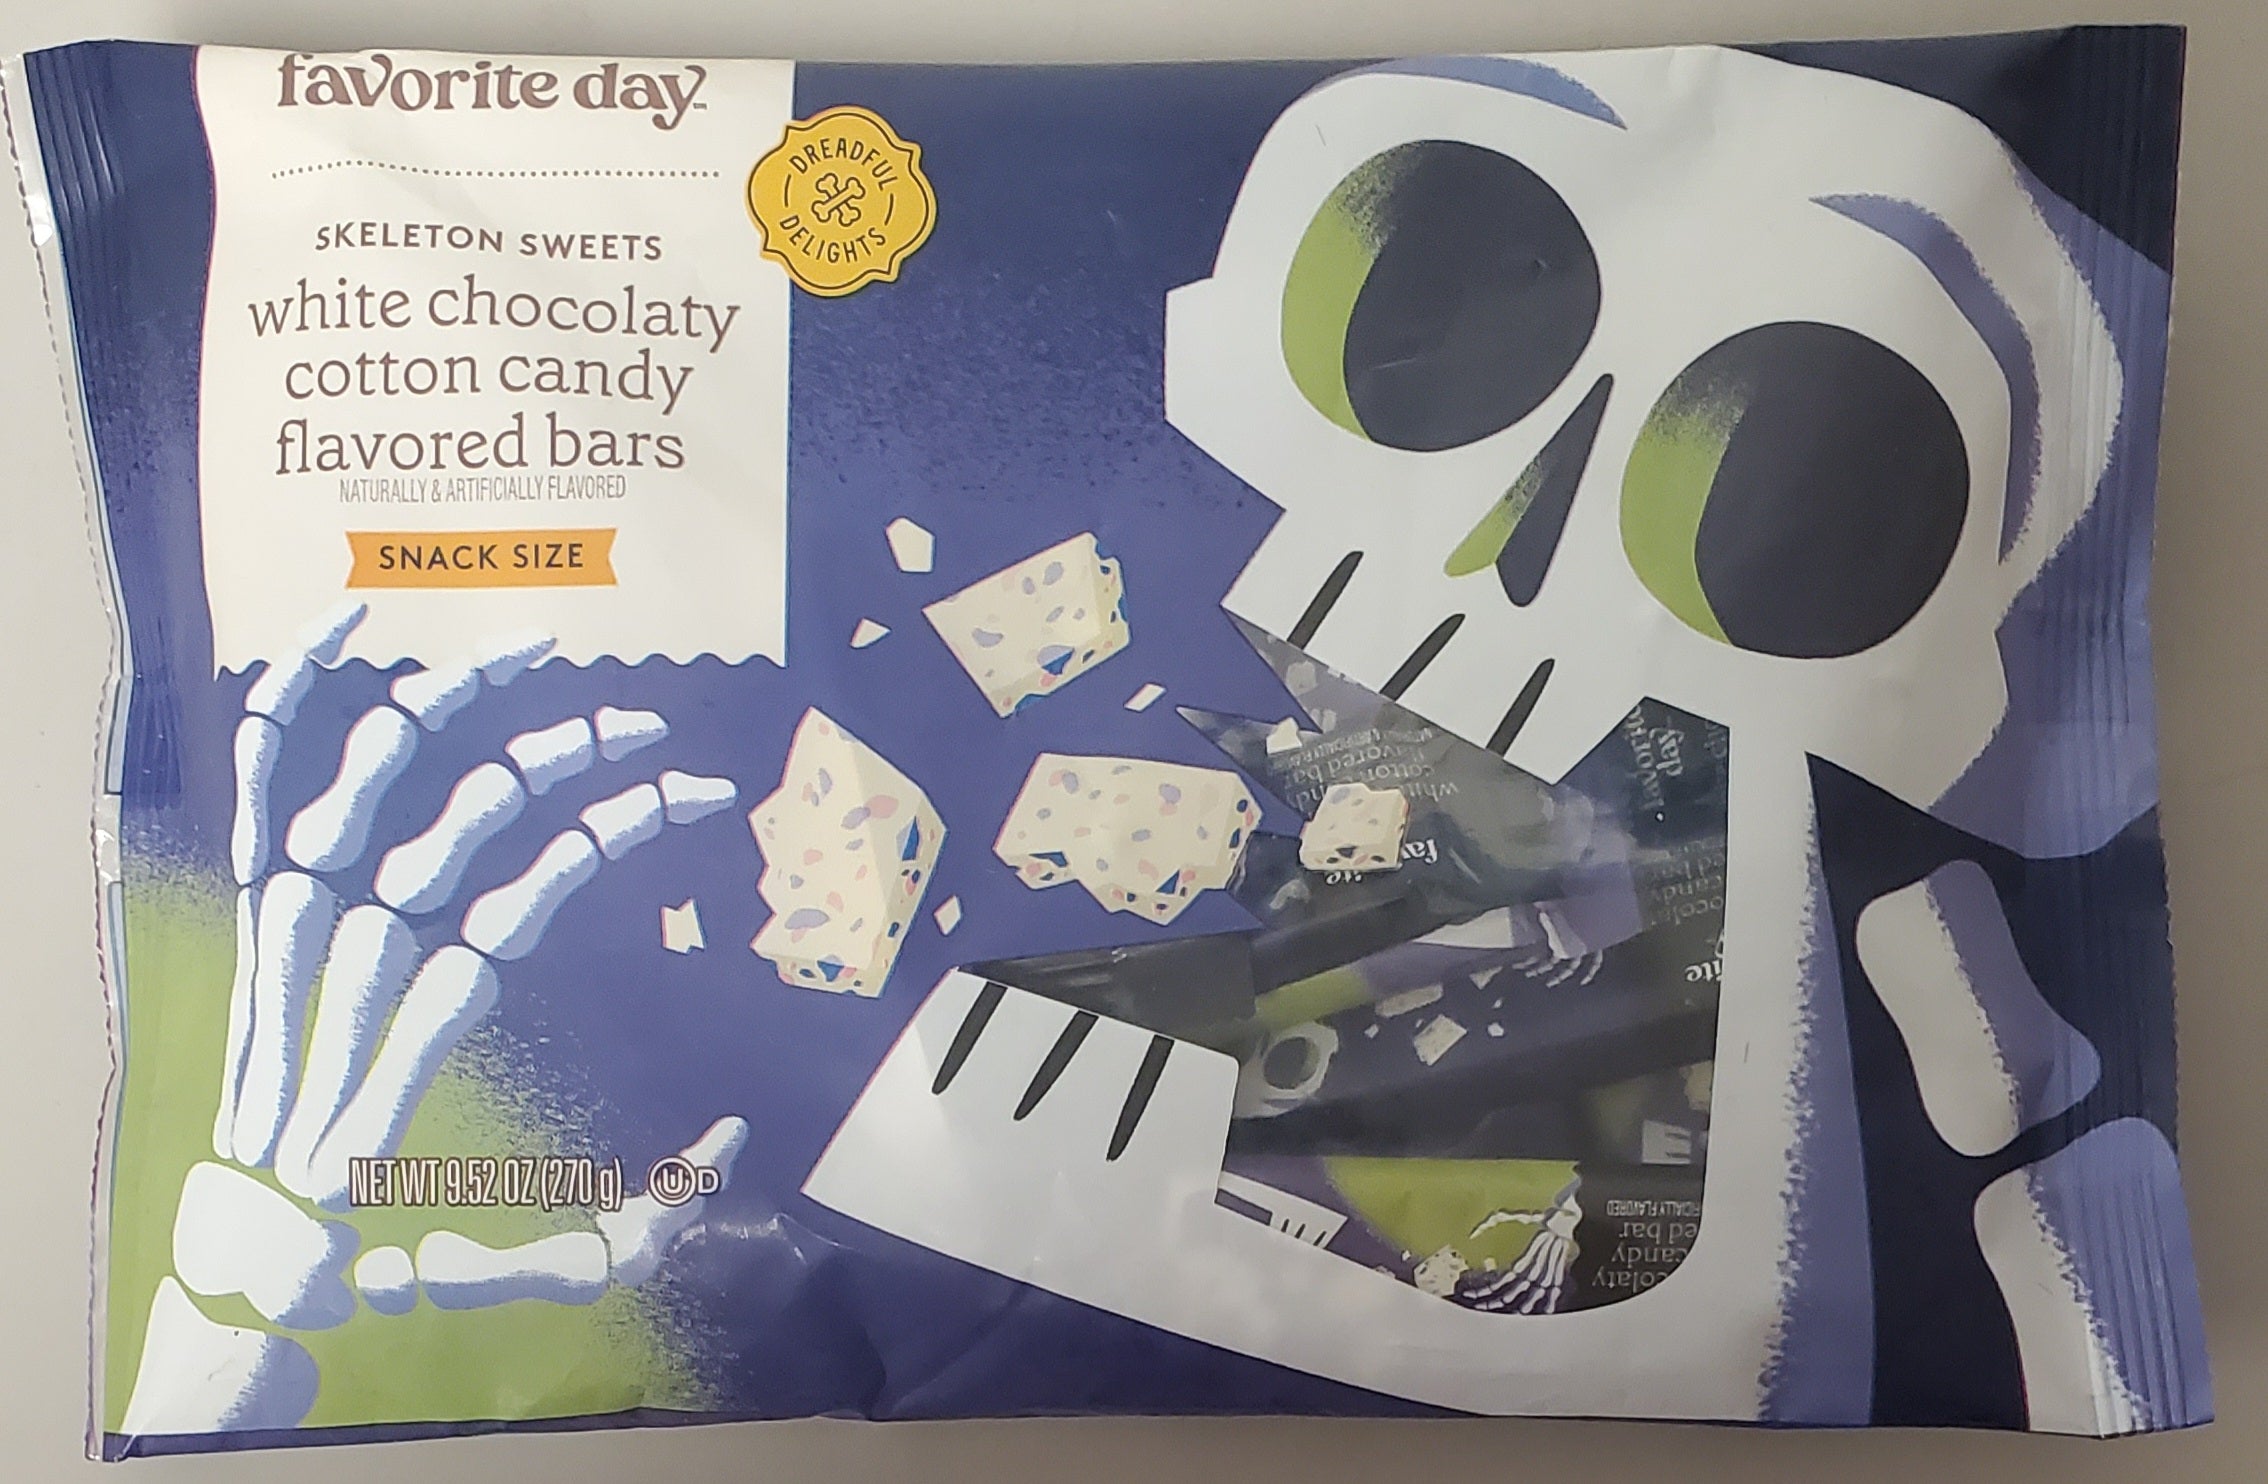 Favorite Day Skeleton Sweets White Chocolaty Cotton Candy Flavored Bars